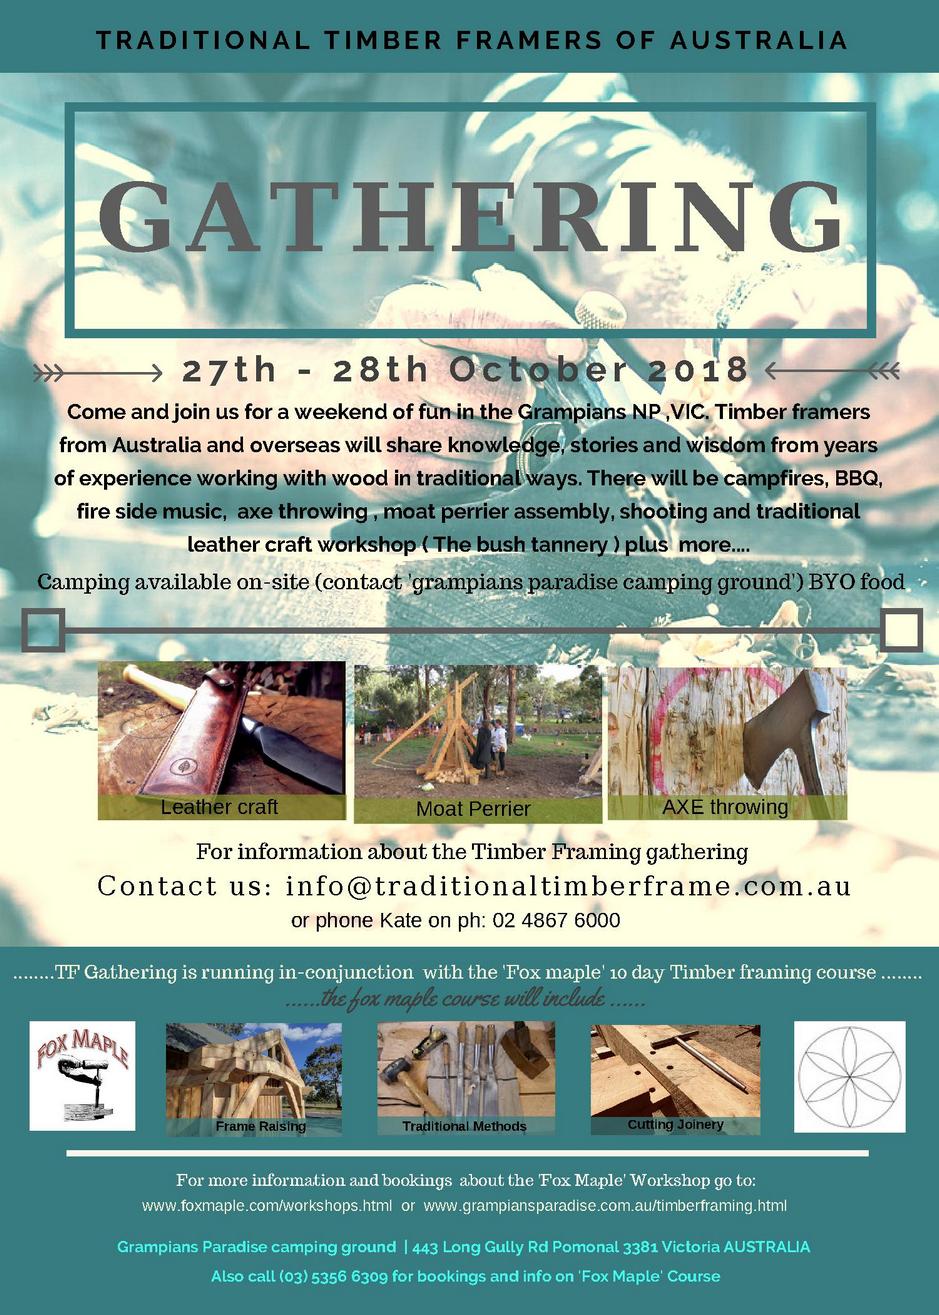 The Timber Framers Gathering in at Grampians Paradise for the weekend of the 27th and 28th October 2018. All are welcome to come 